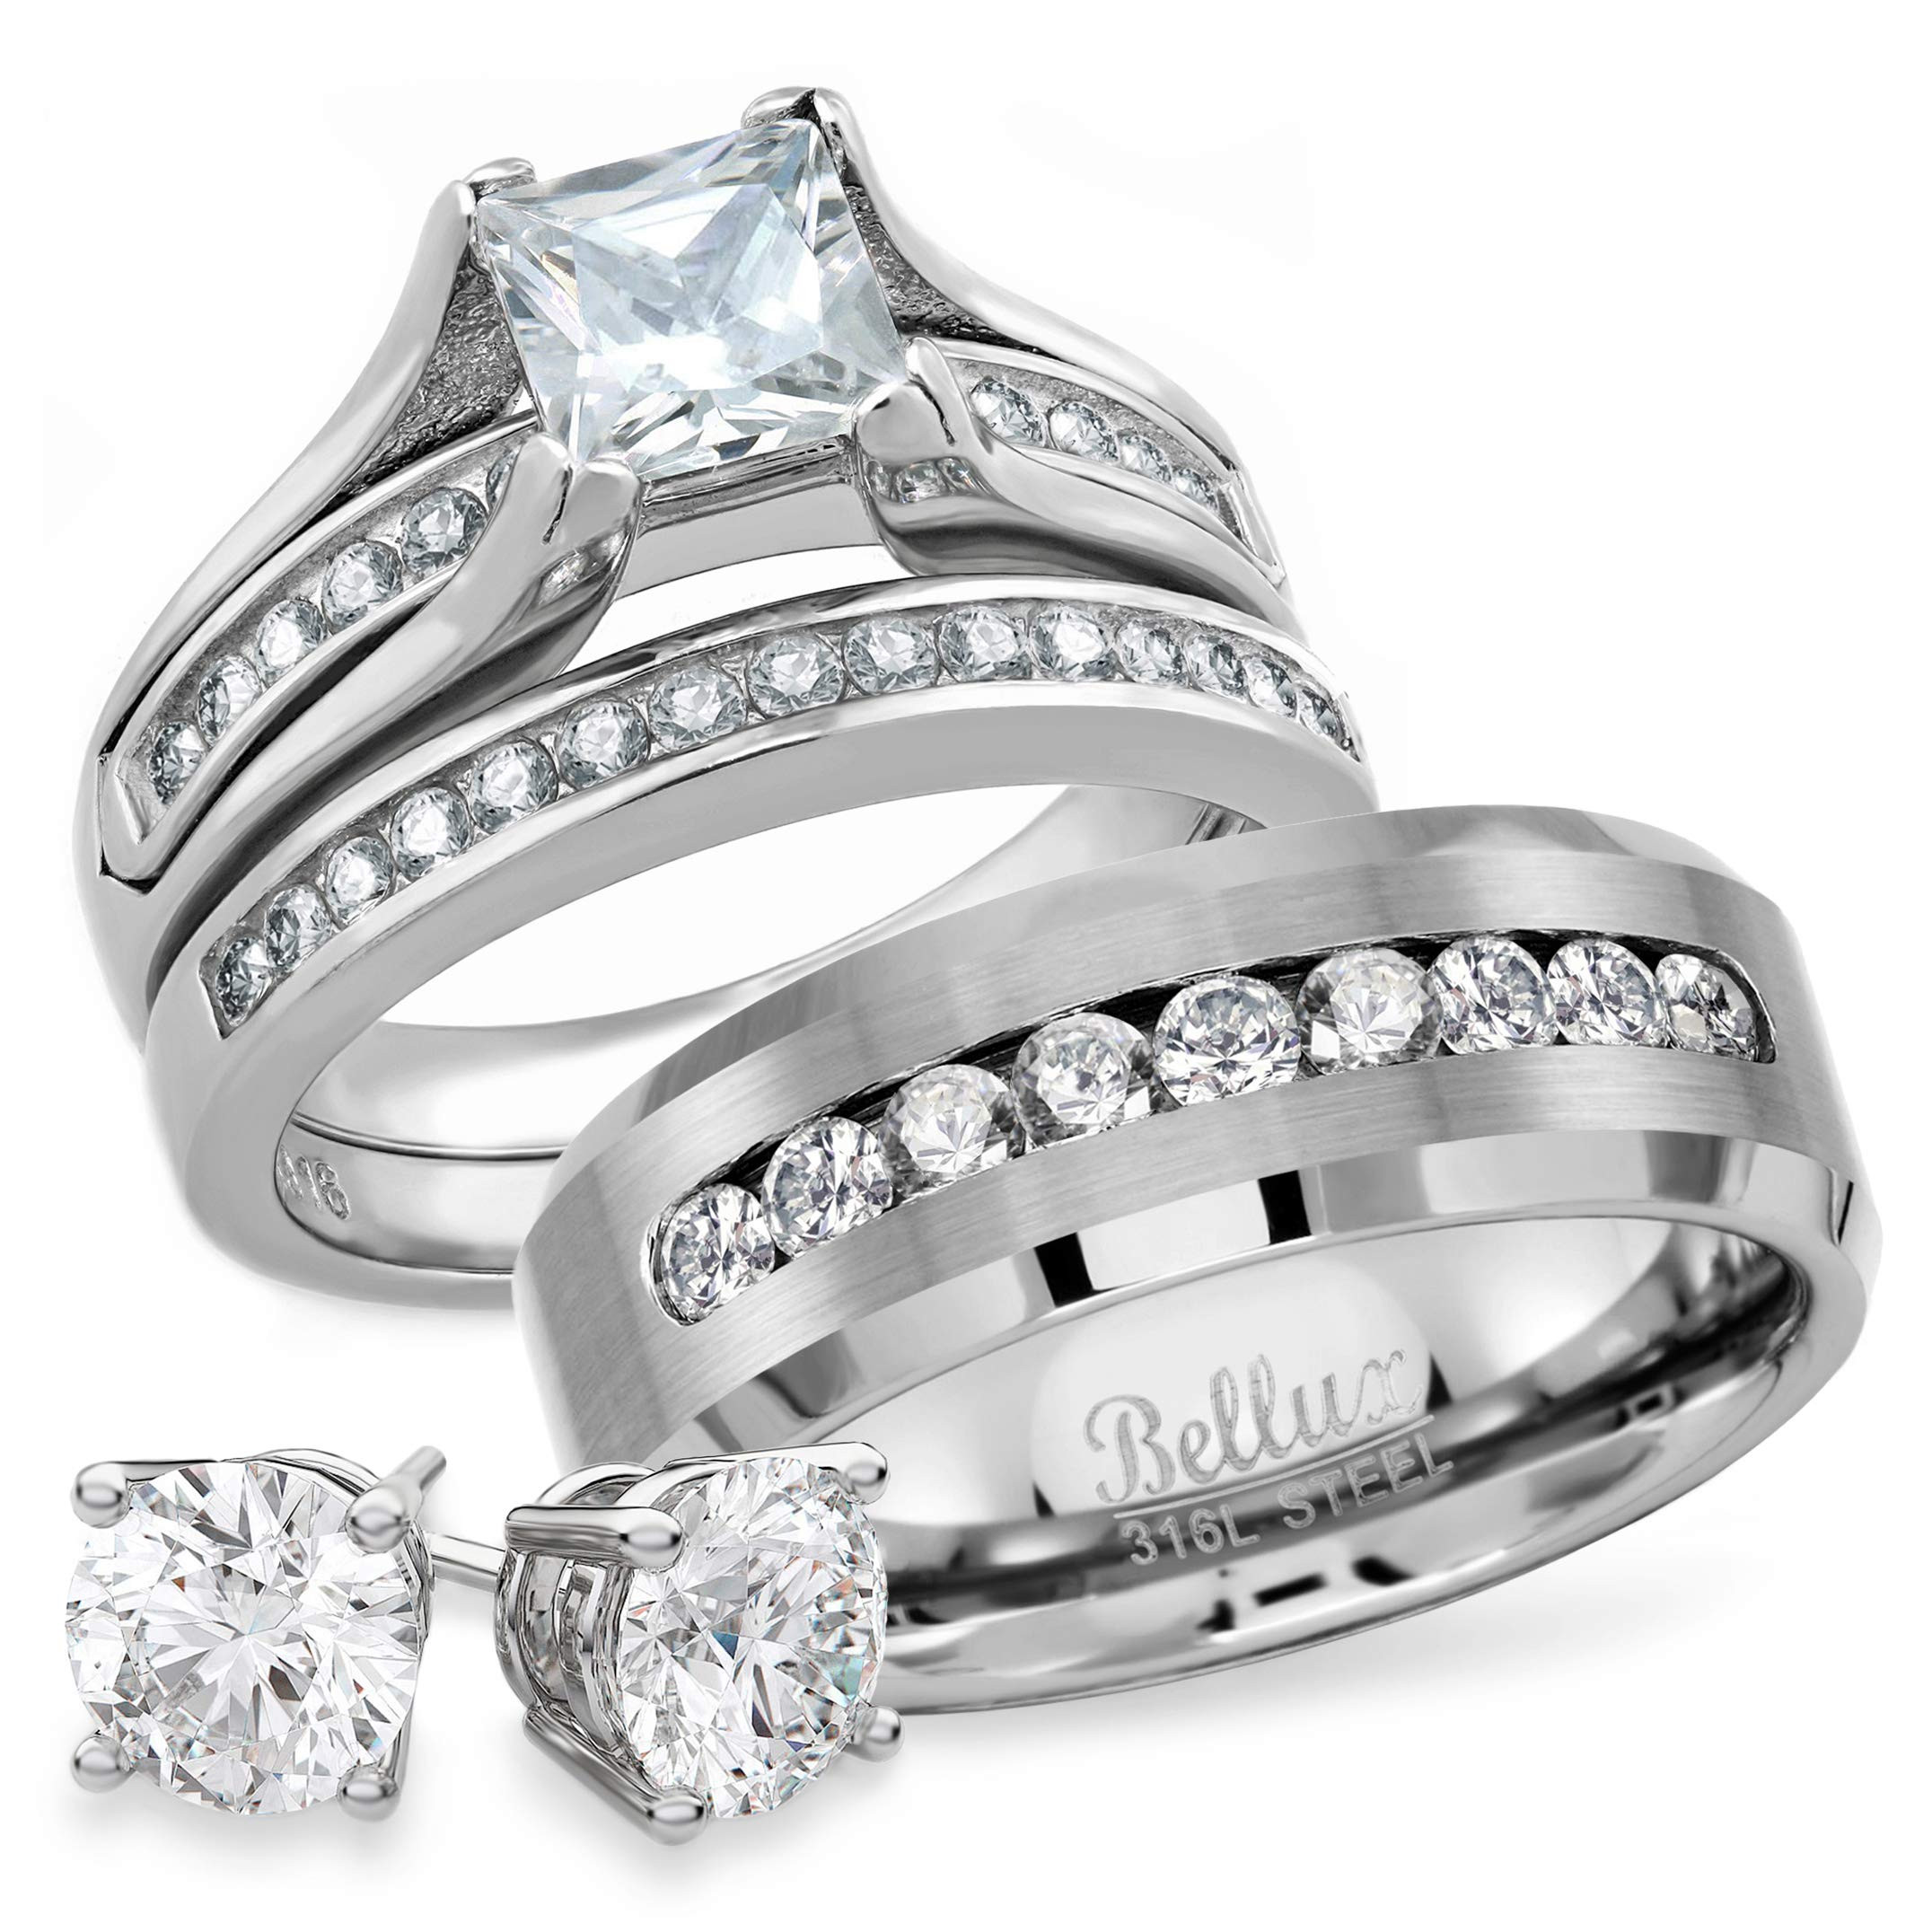 Wedding Ring Sets For Her And Him
 Bellux Style His and Hers Wedding Rings Set for Him and